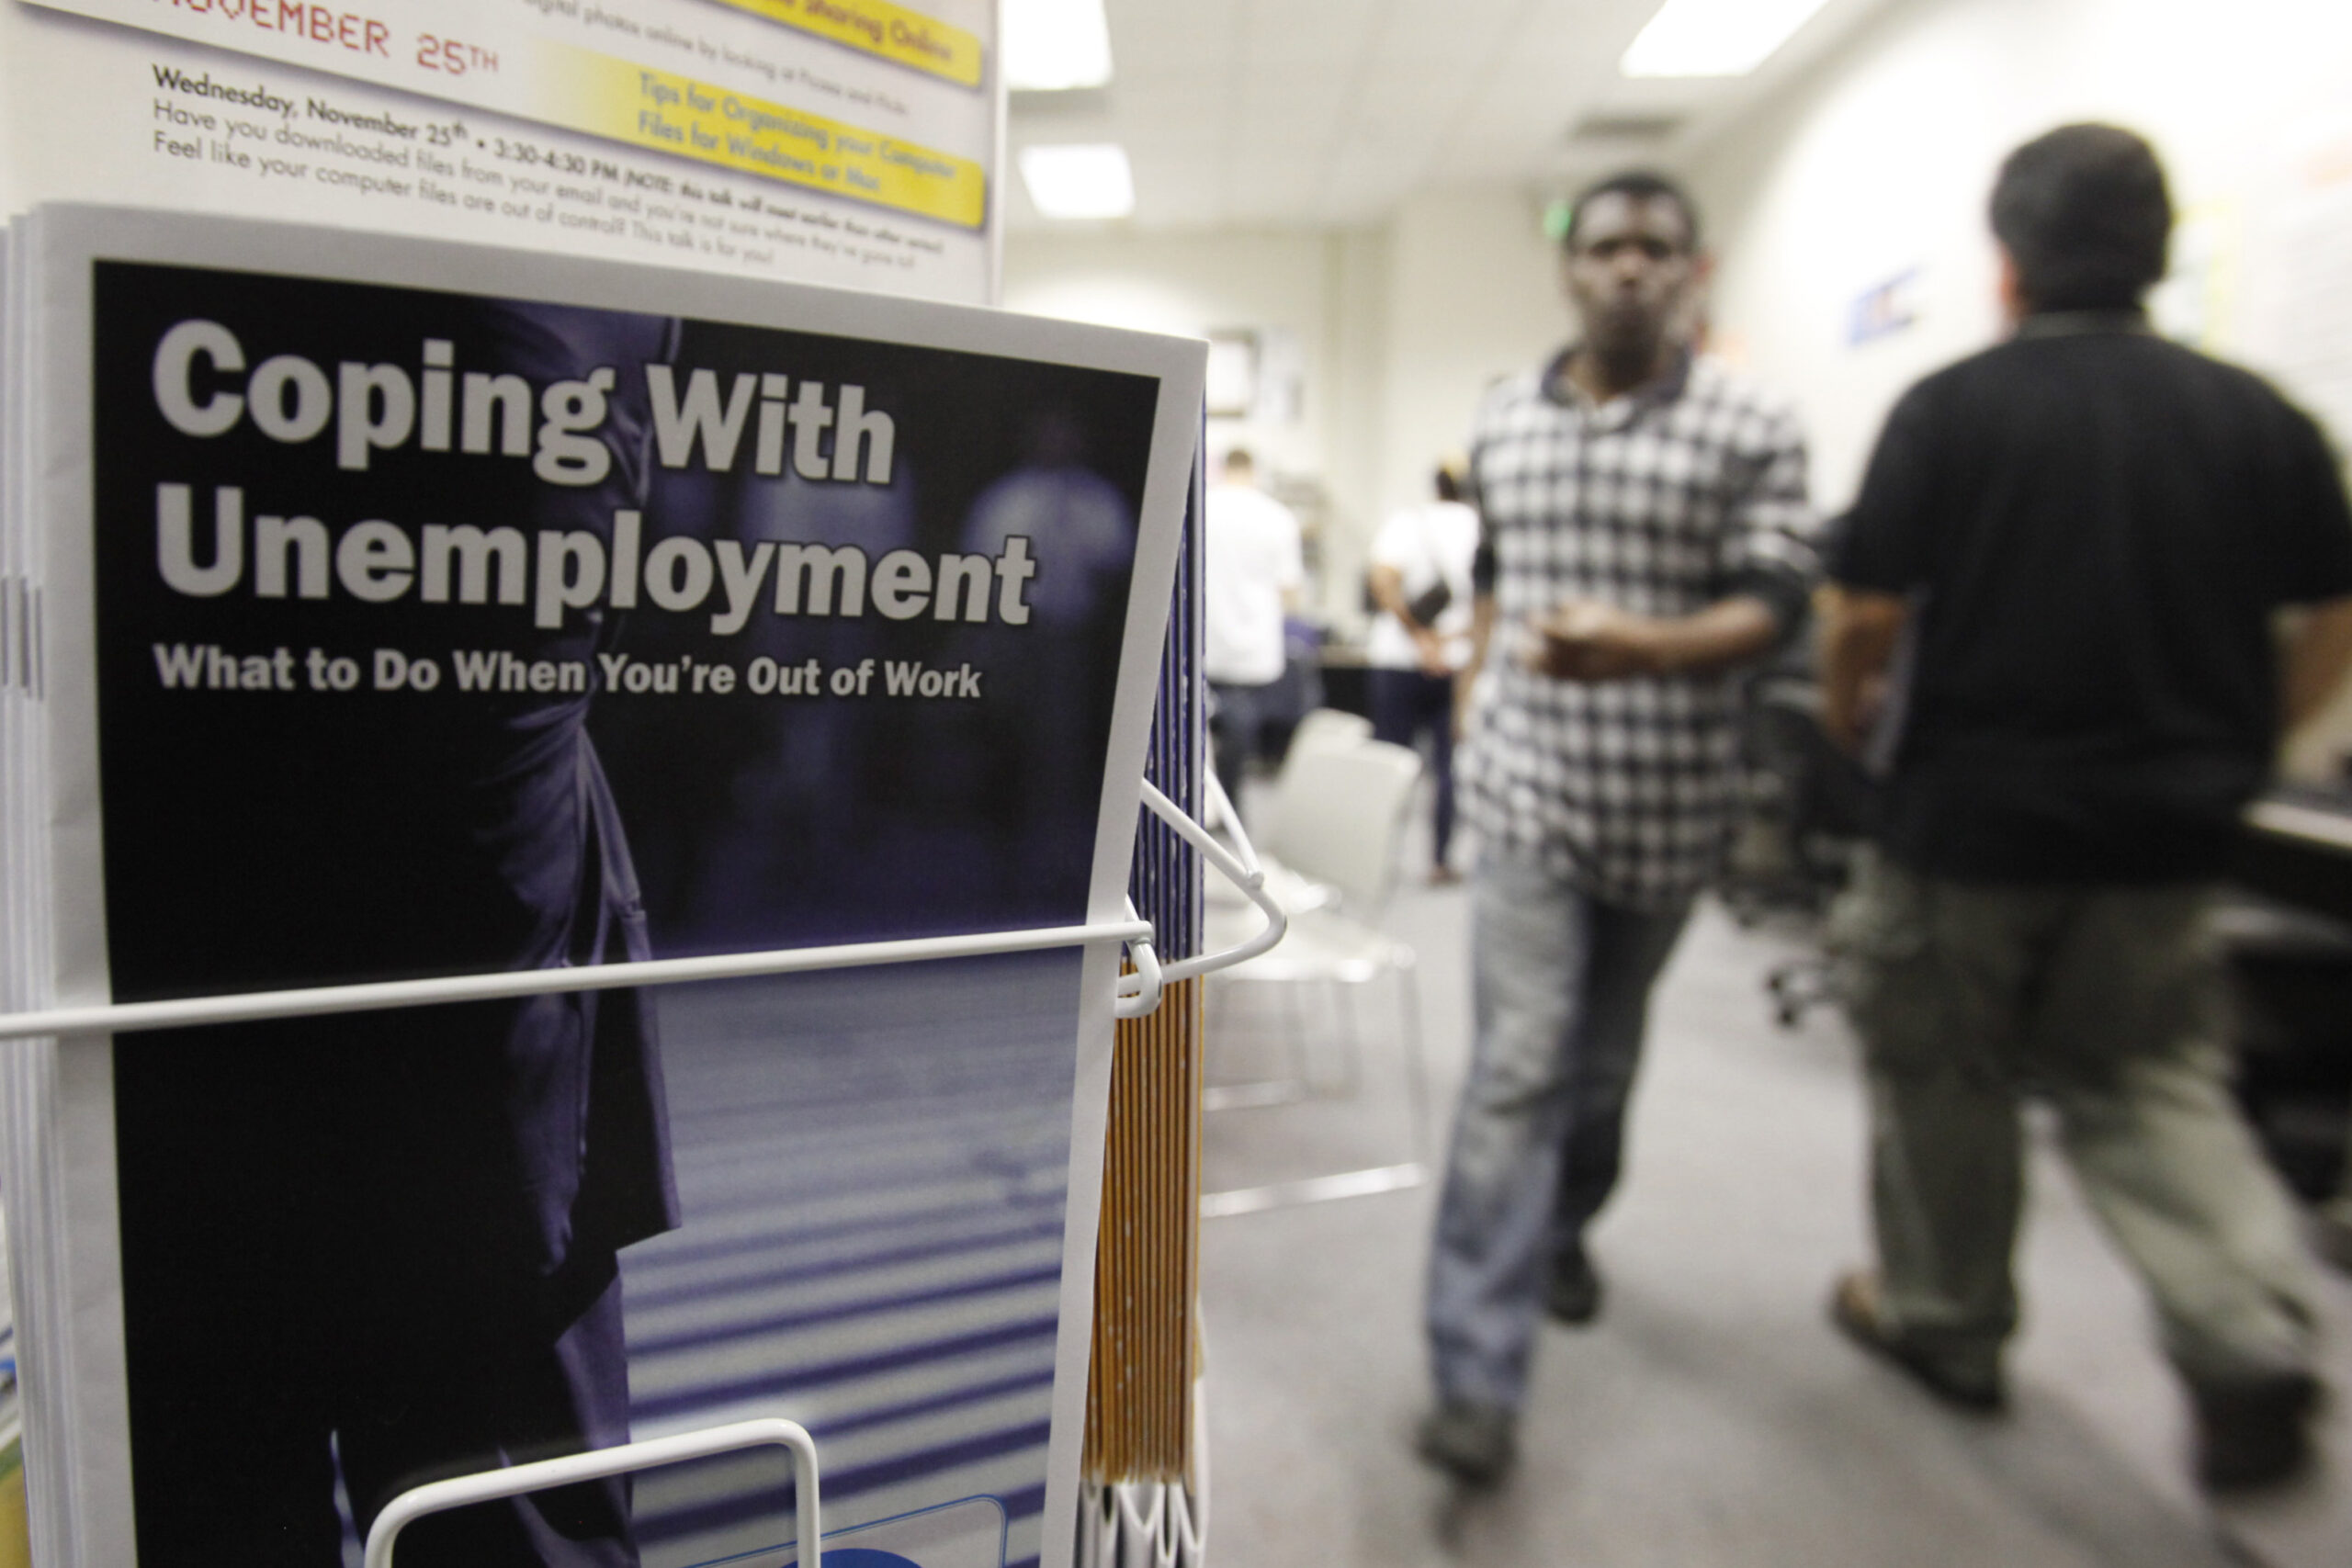 A flyer titled "Coping With Unemployment" in a rack with people blurred in the background.